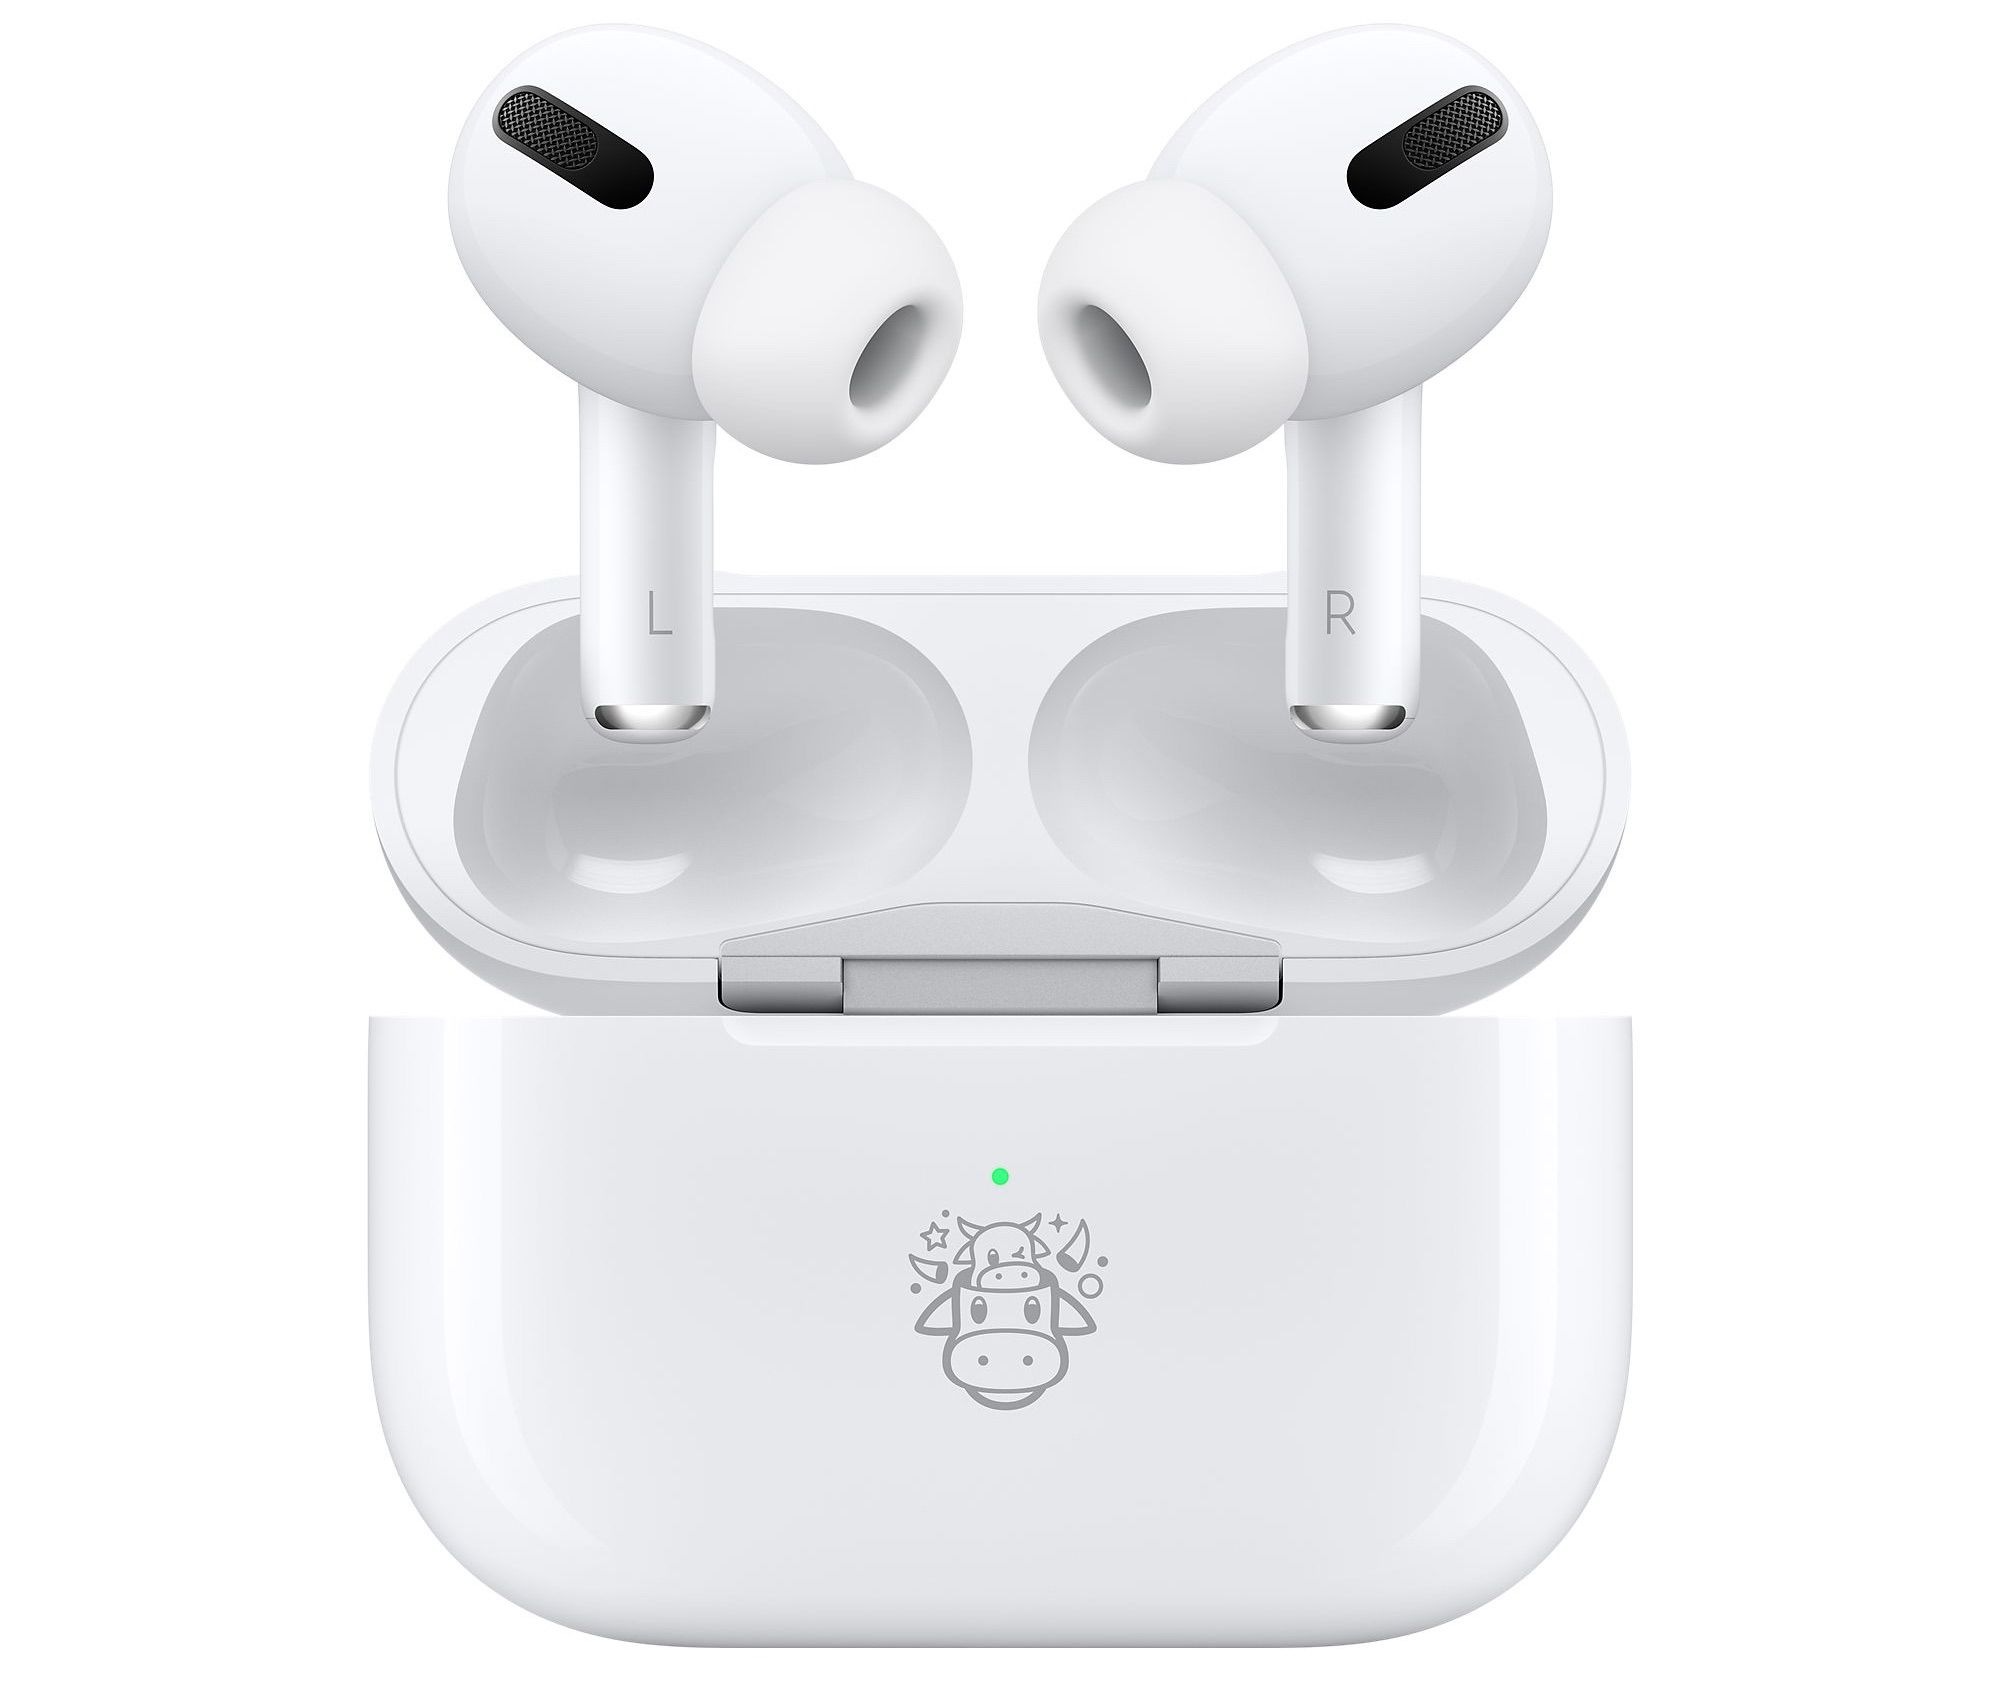 Apple Launches Ox-themed AirPods Pro Special Edition in China for Chinese New Year